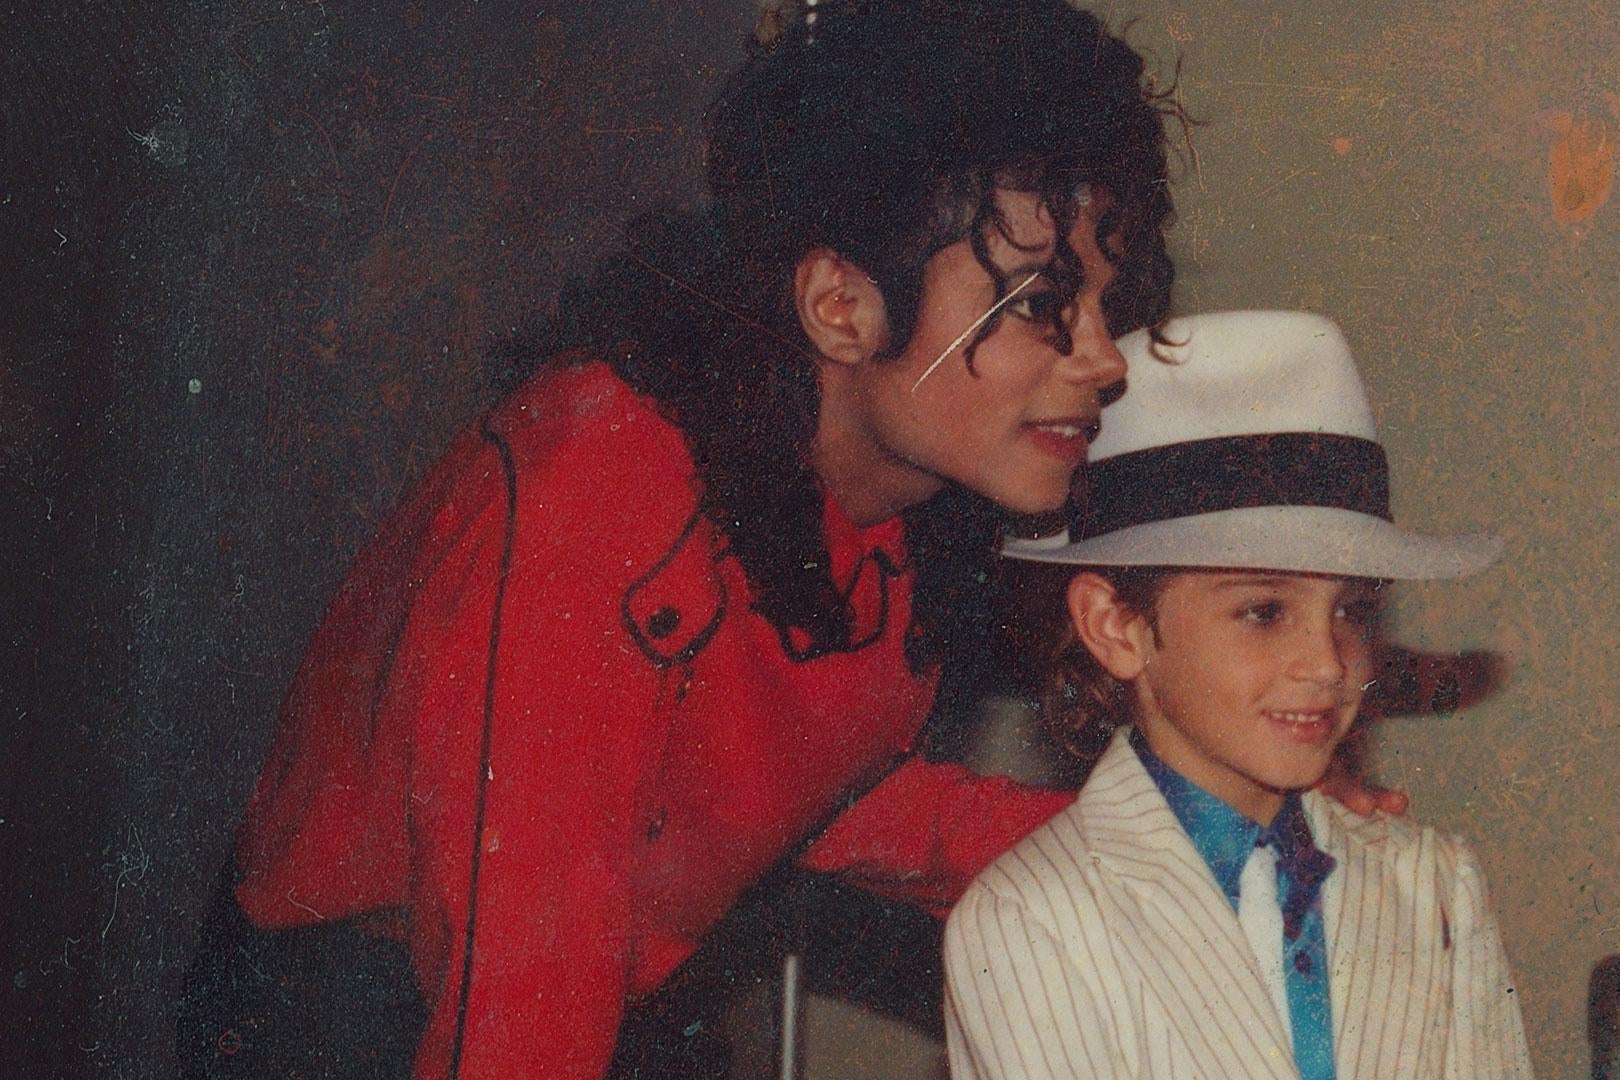 Michael Jackson in a red shirt poses with a child, Wade Robson, dressed in an outfit similar to Jackson's Smooth Criminal persona.